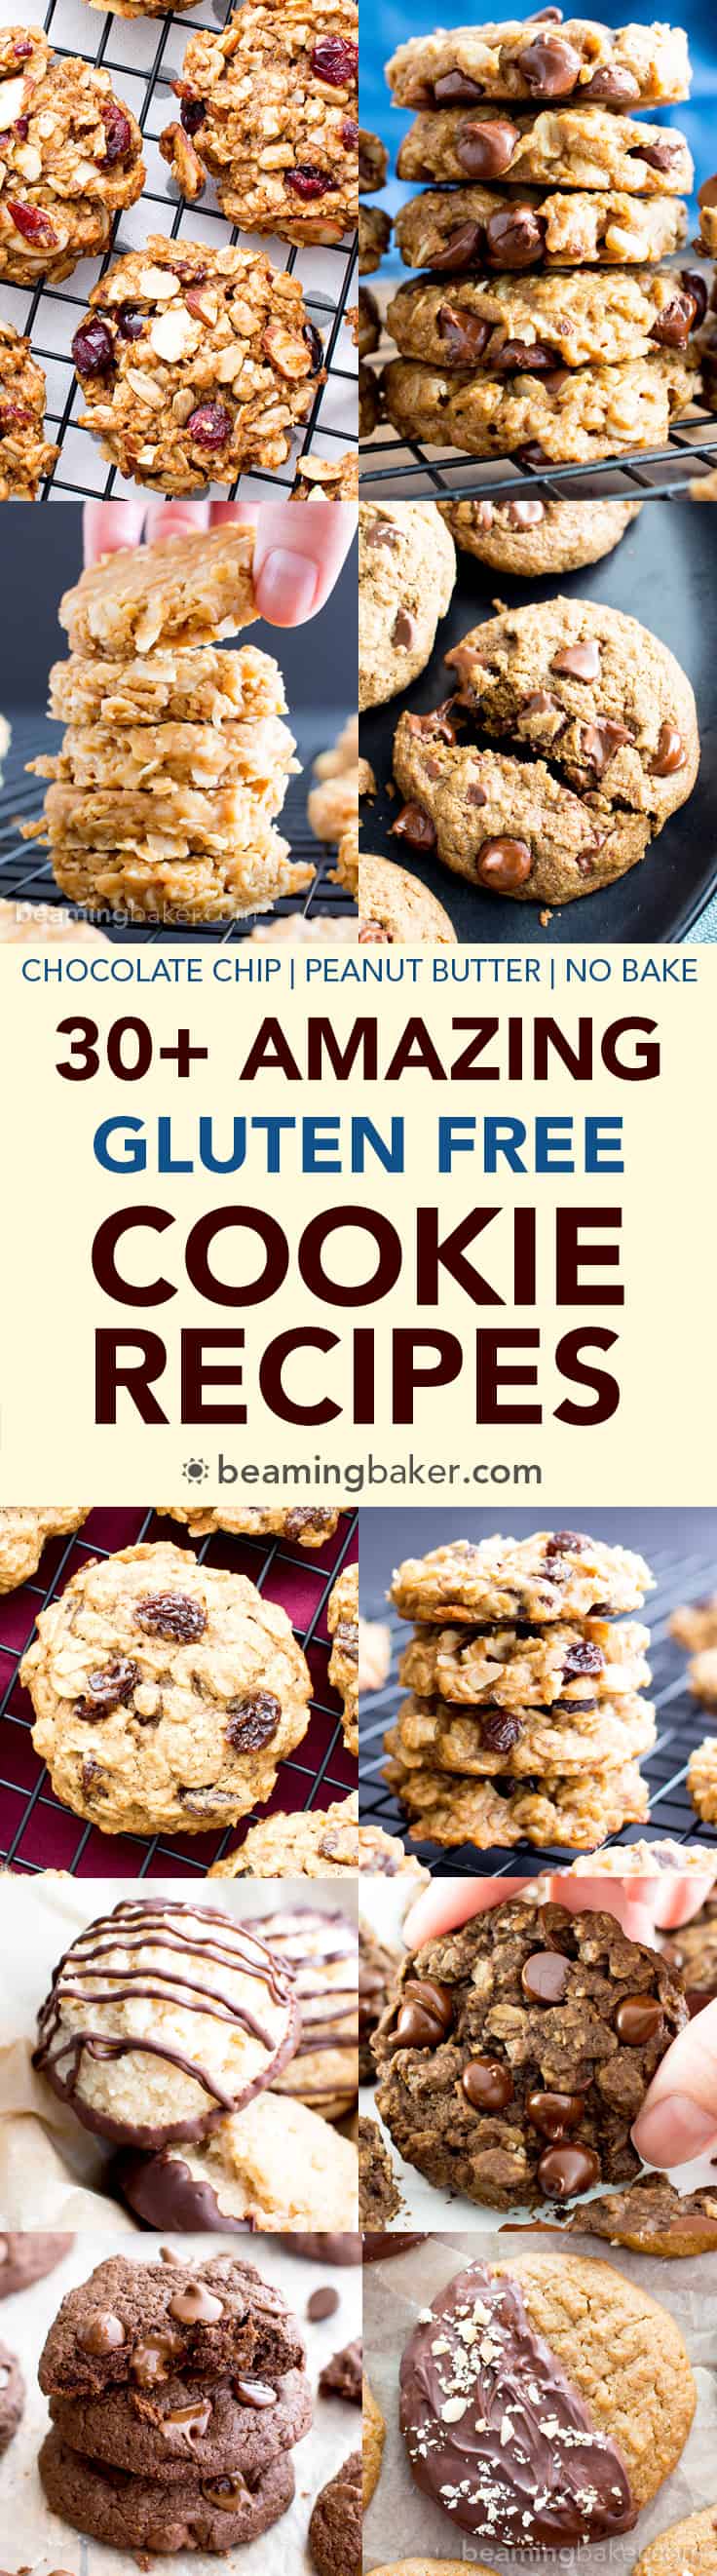 30+ Amazing Gluten Free Cookie Recipes (V, GF): a mouthwatering collection of irresistible gluten free cookie recipes to satisfy cookie lovers everywhere! #Vegan #GlutenFree #DairyFree #Cookies #Dessert | Recipe on BeamingBaker.com